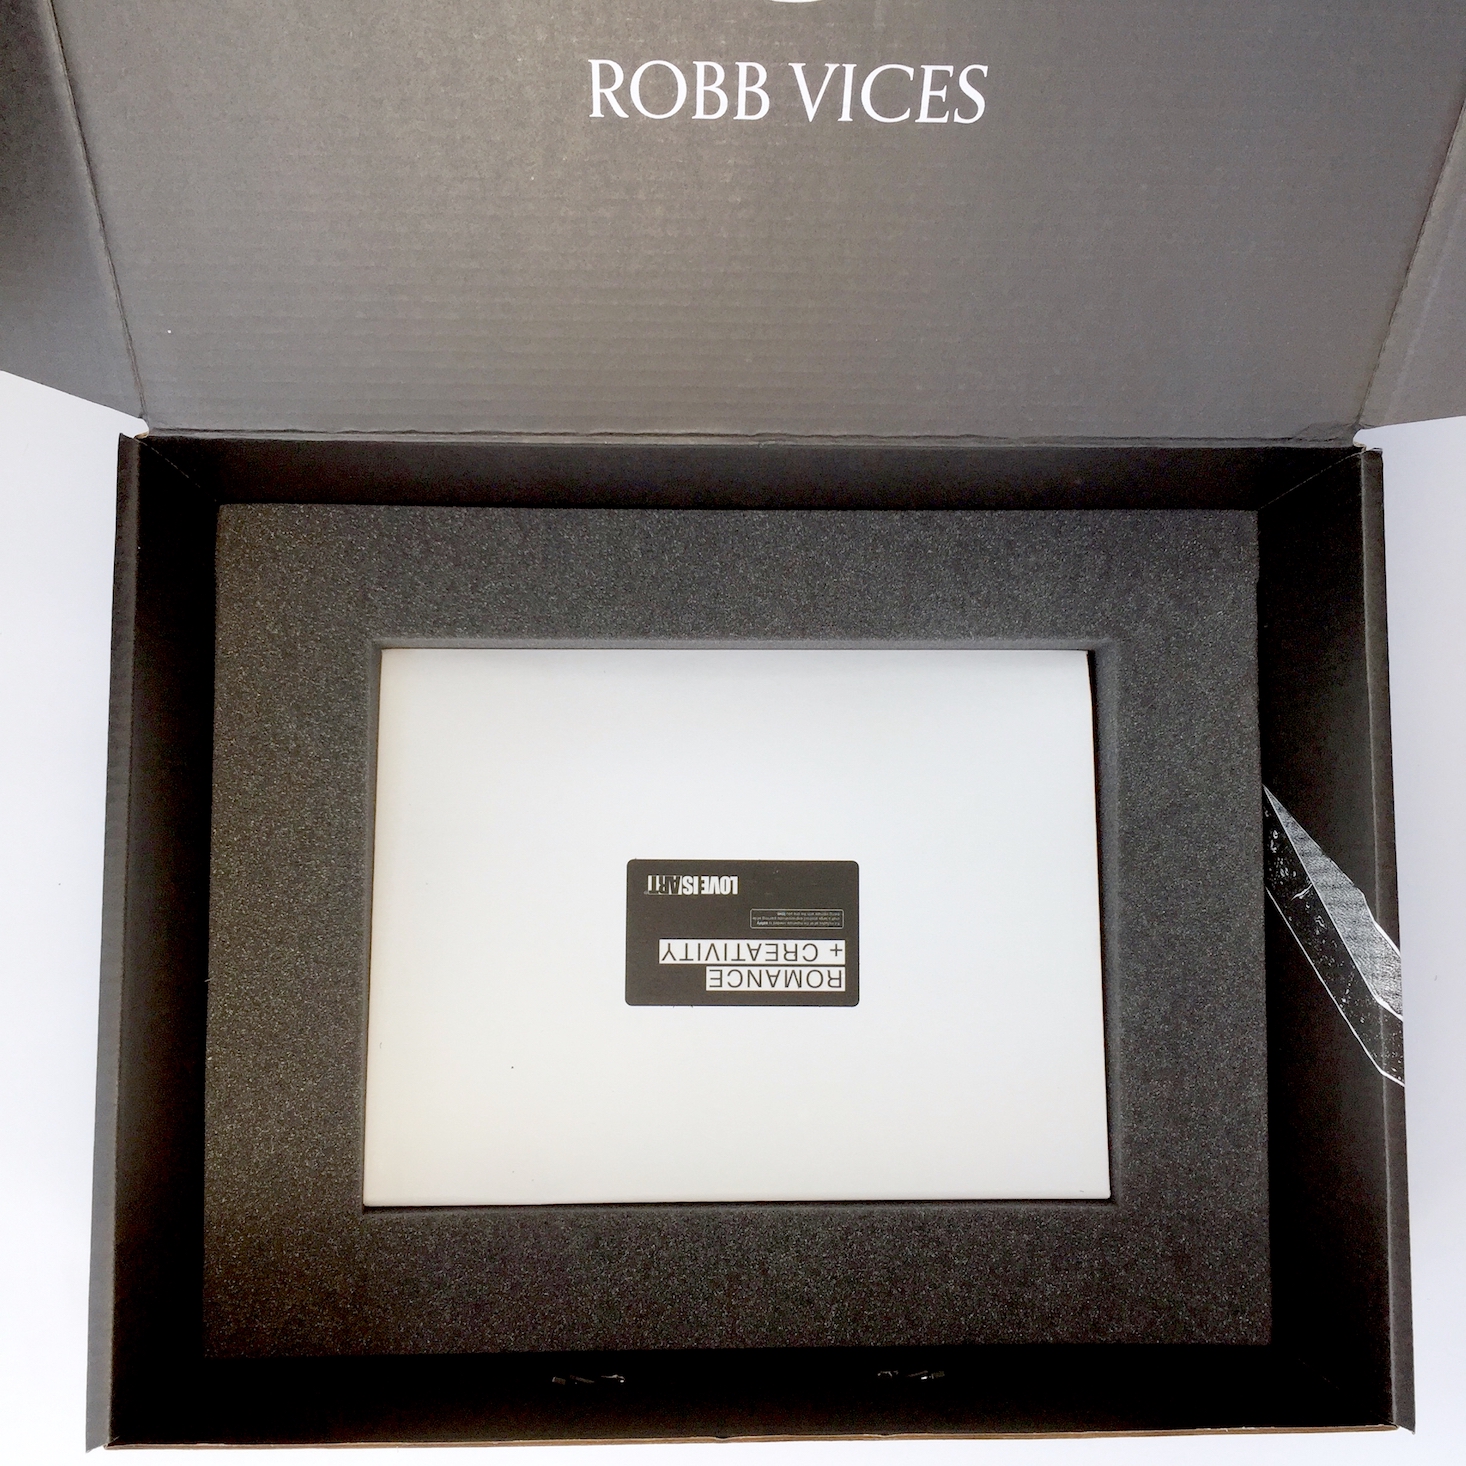 Robb-vices-february-2017-box-layer